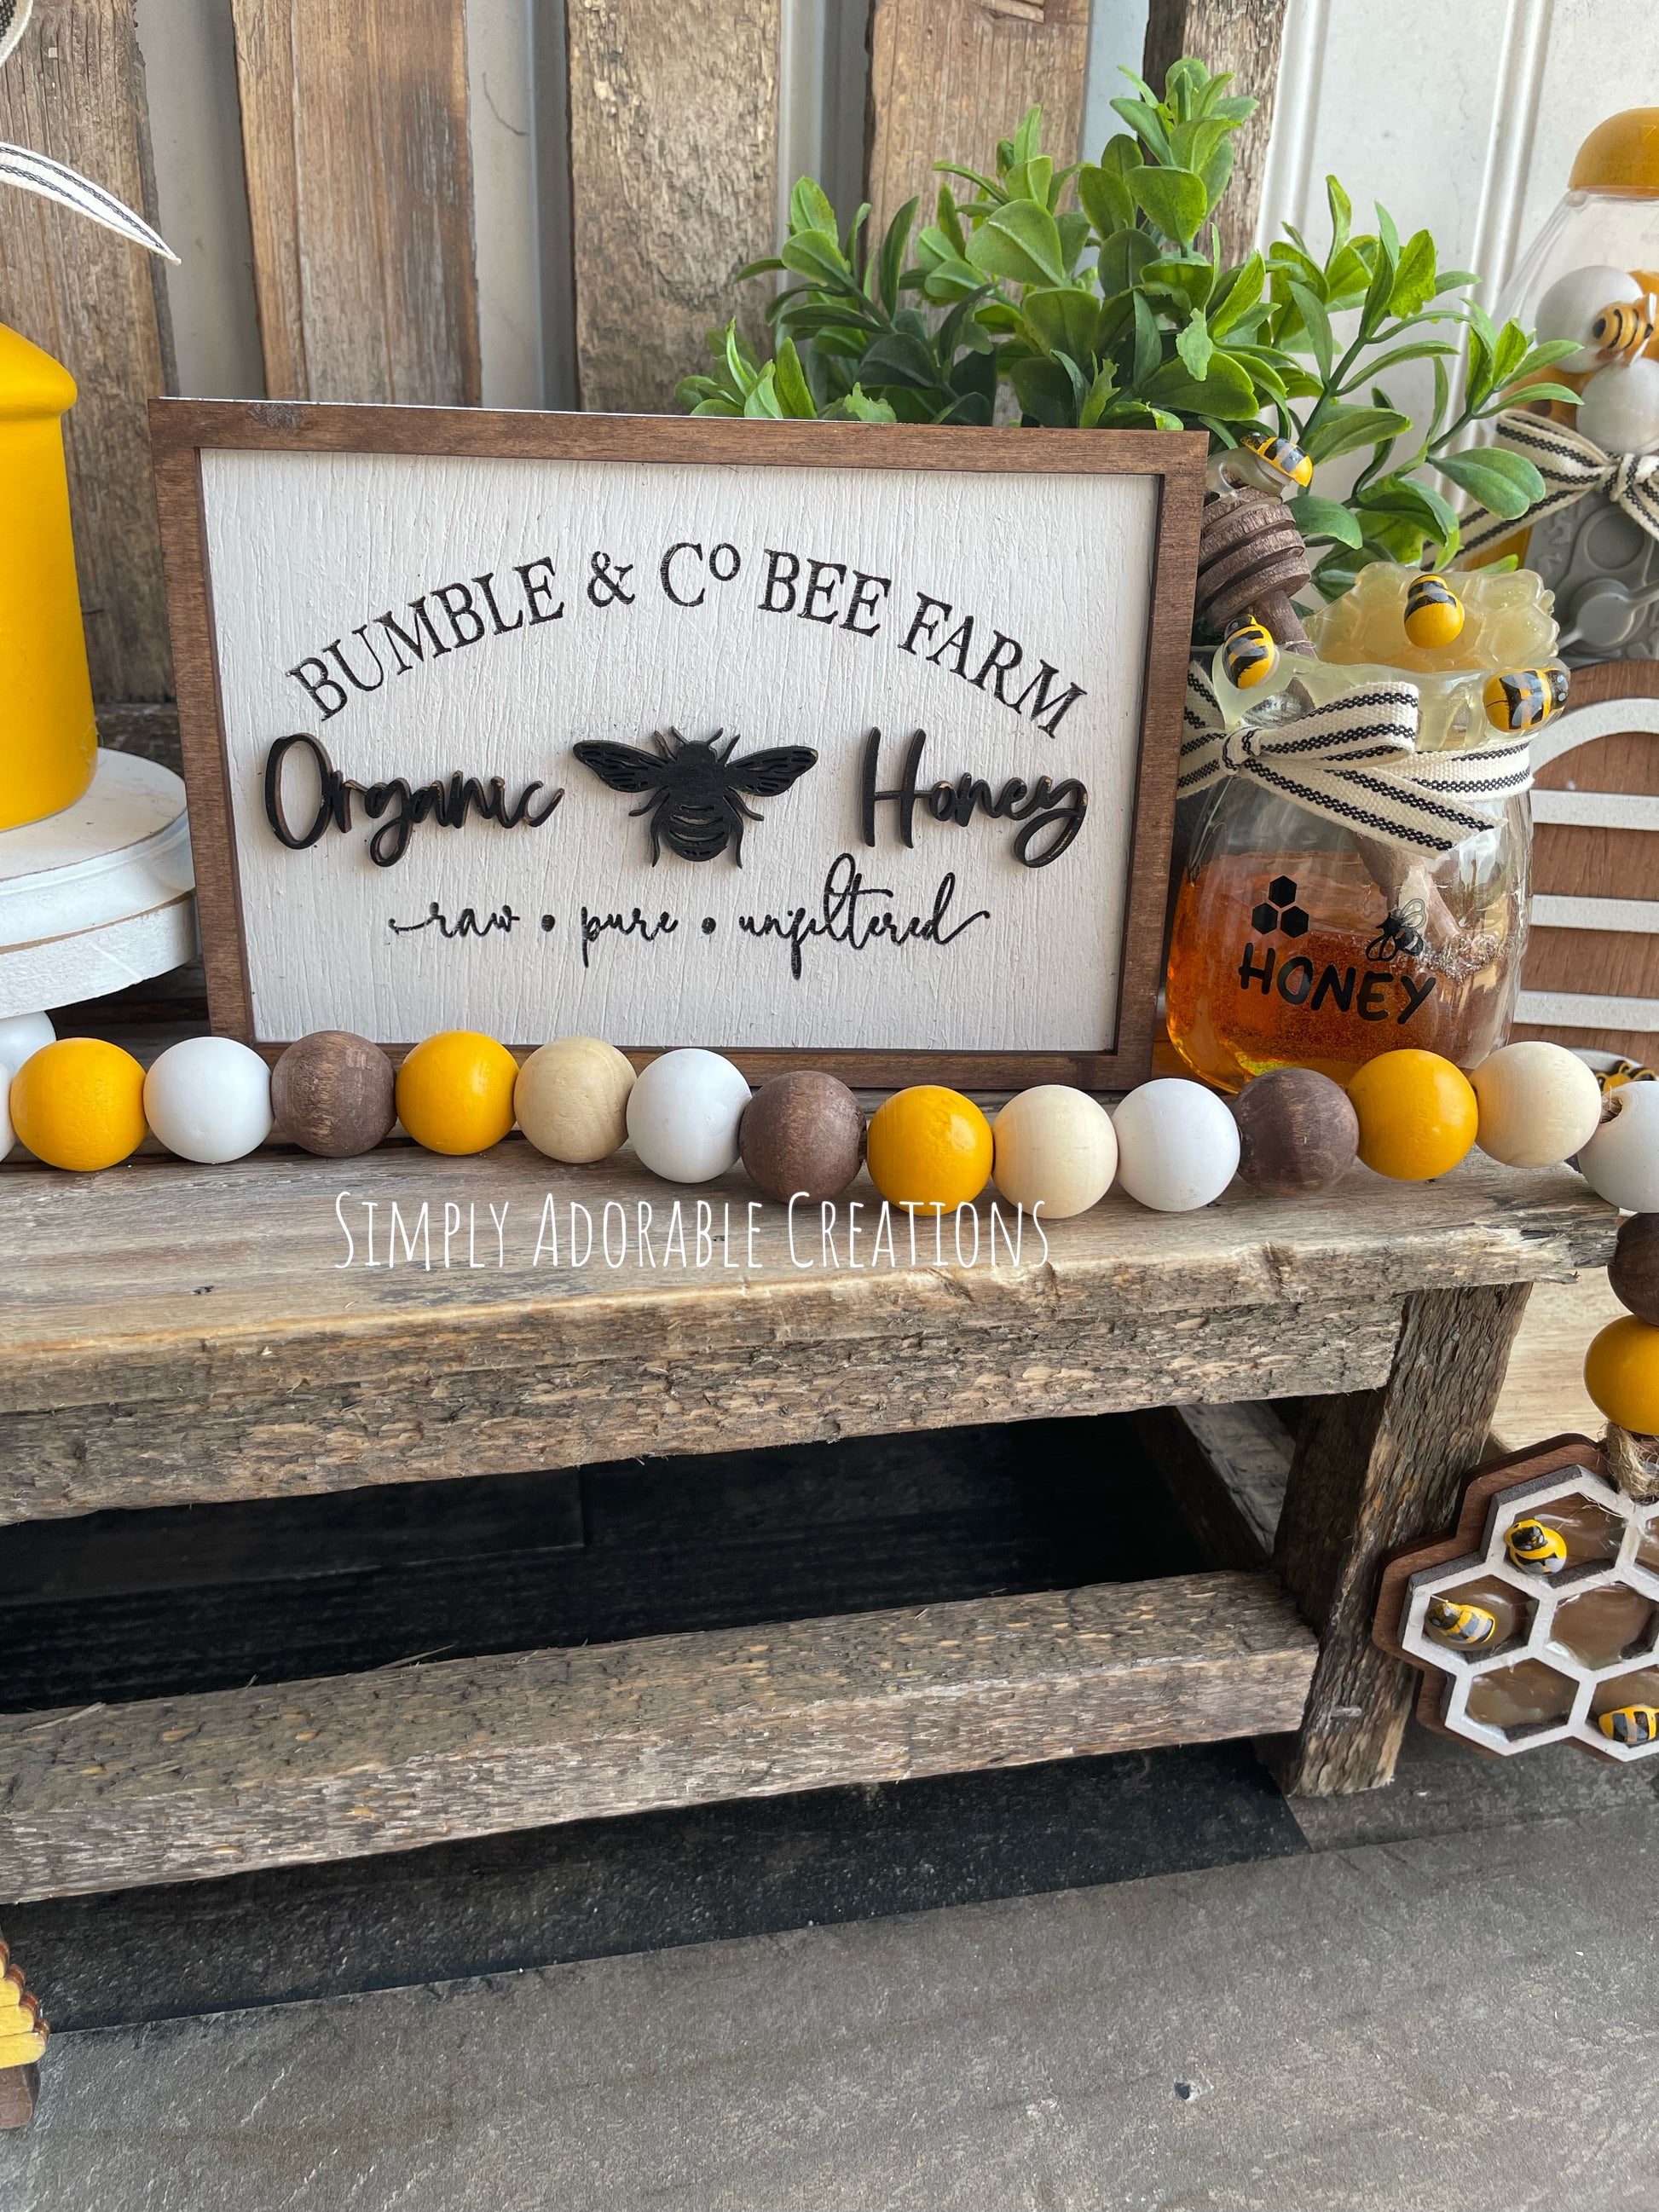 Summer Decor Tiered Tray Sign Bee Flower Wreath